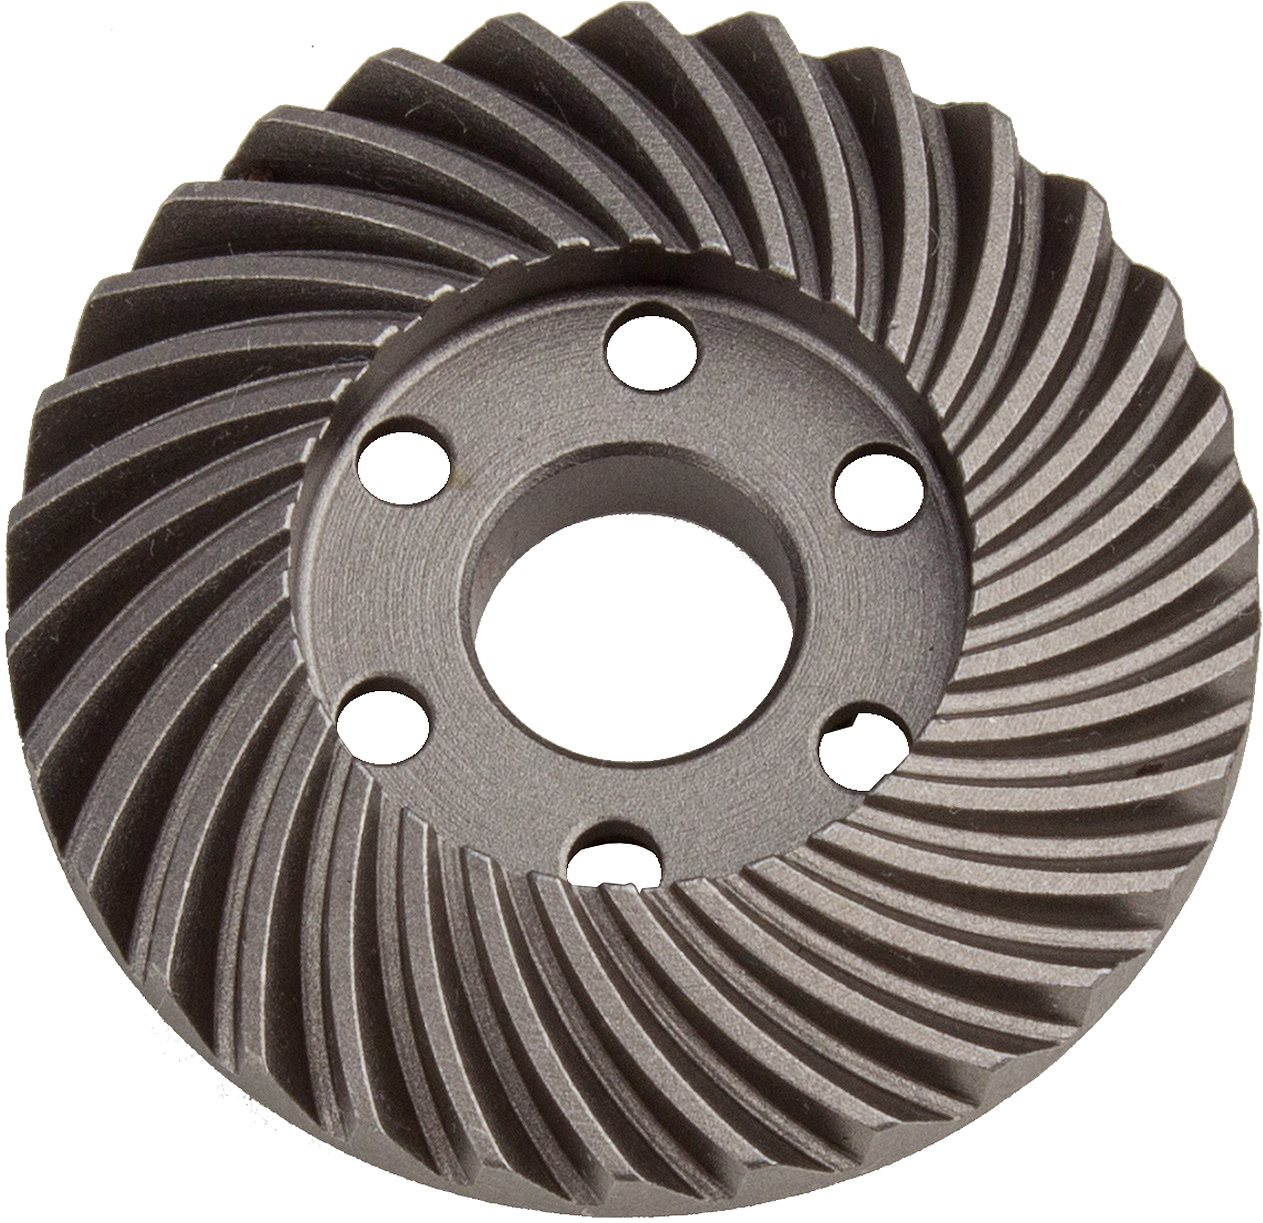 Associated Factory Team Machined Steel Ring Gear, 30 Tooth, For Enduro Truc